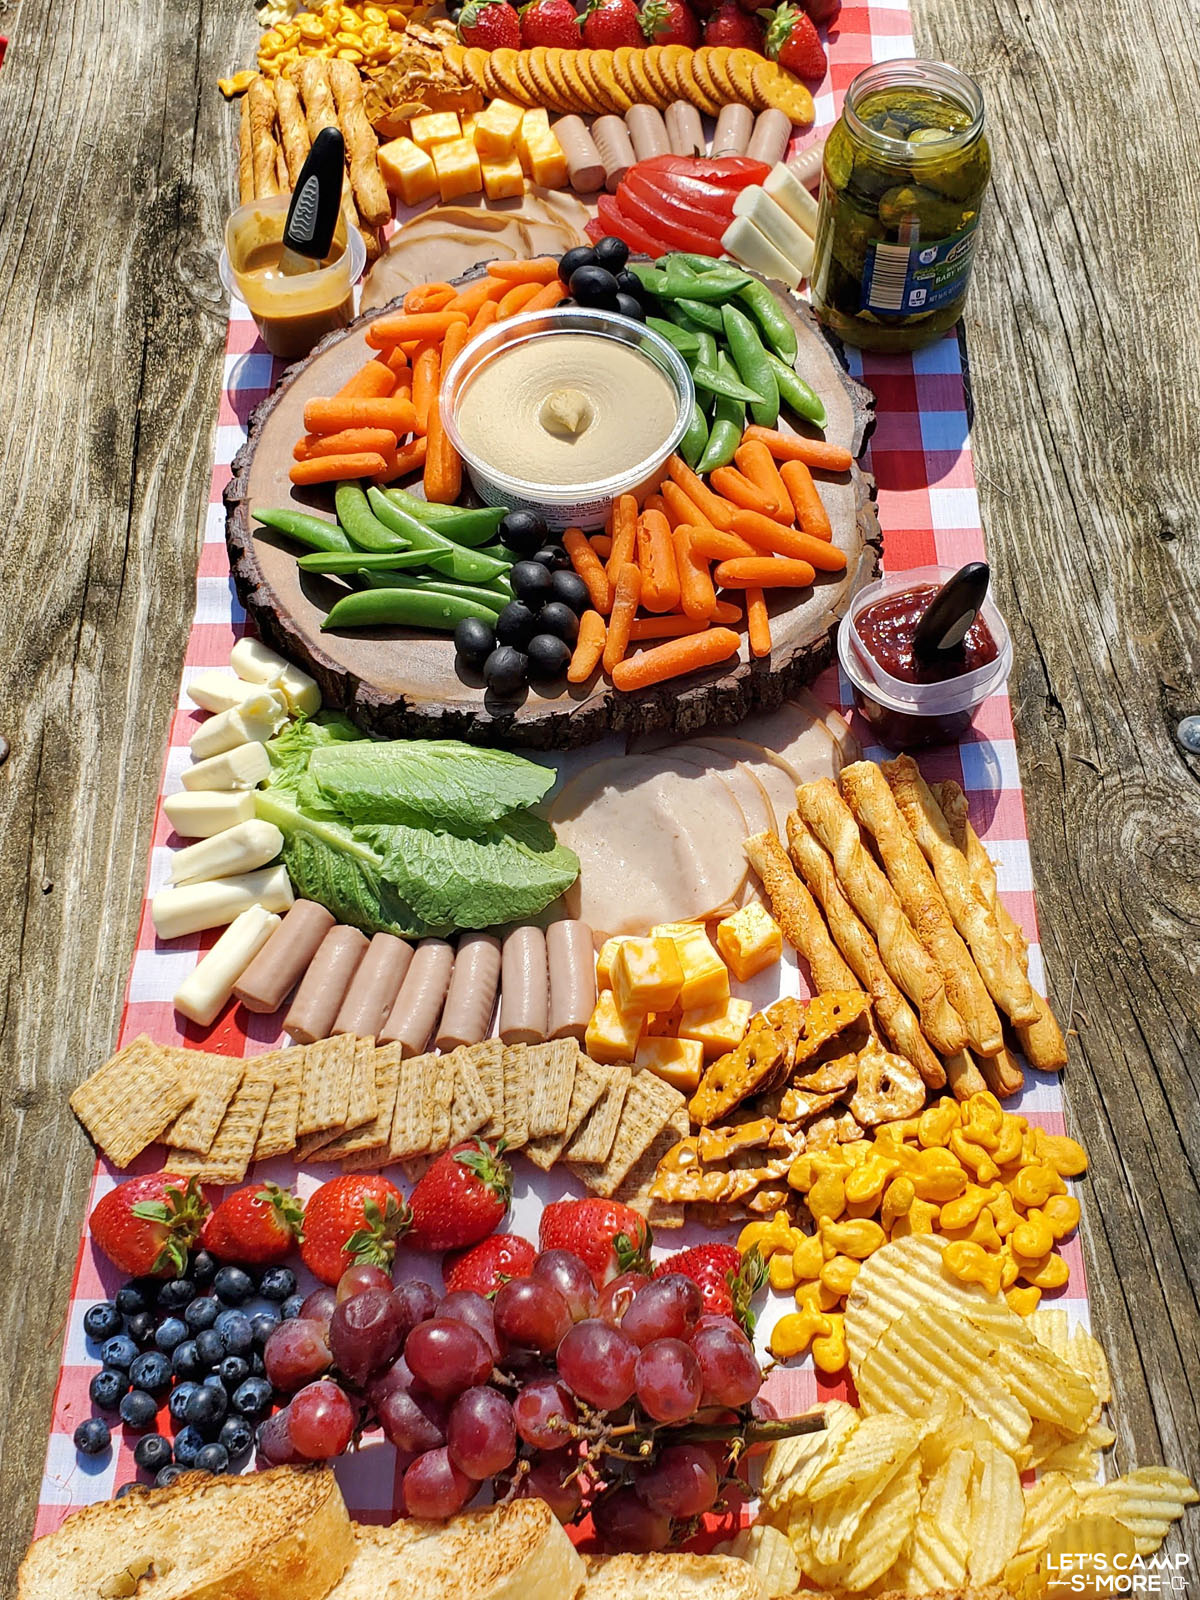 https://letscampsmore.com/wp-content/uploads/2021/04/Simple-Camping-Charcuterie-Board.jpg